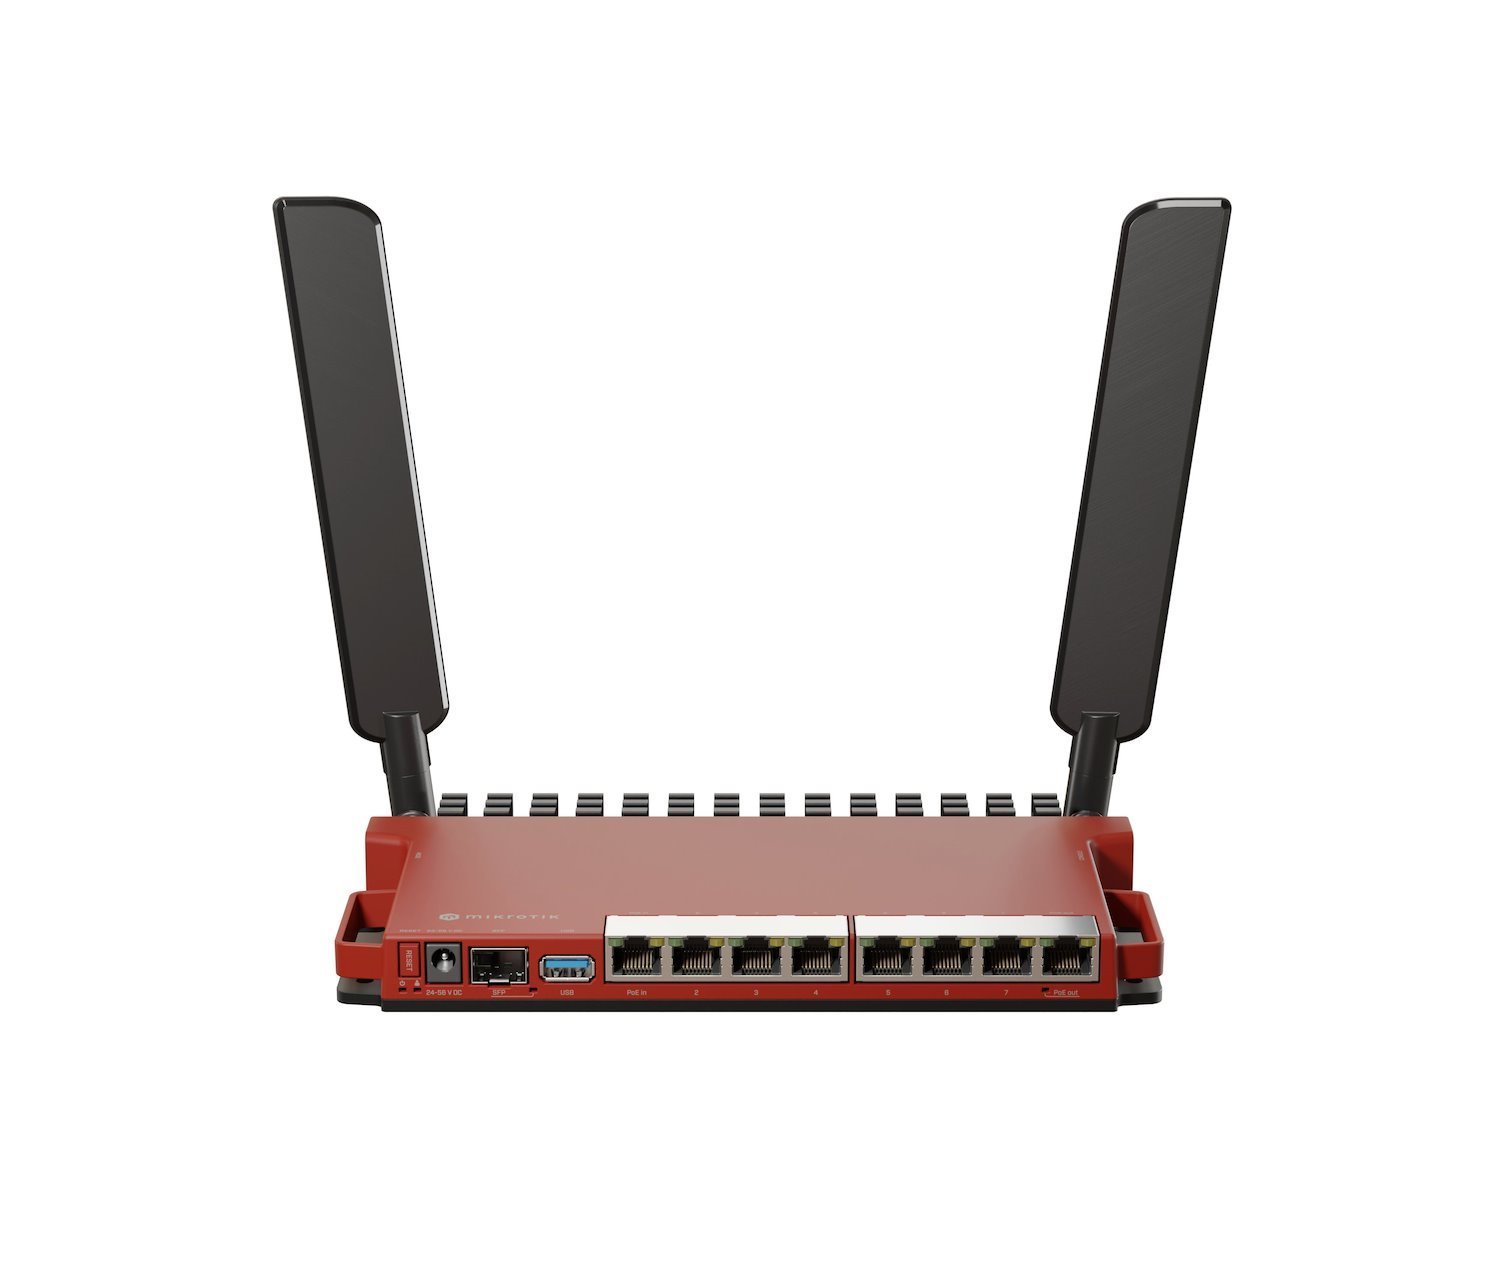 Mikrotik L009UiGS-2HaxD-IN Wireless Router Gigabit Ethernet Single-Band [2.4 GHz] Red (MikroTik L009 8 Port PoE WiFi 6 High Performance Router - L009UiGS-2HaxD-IN)